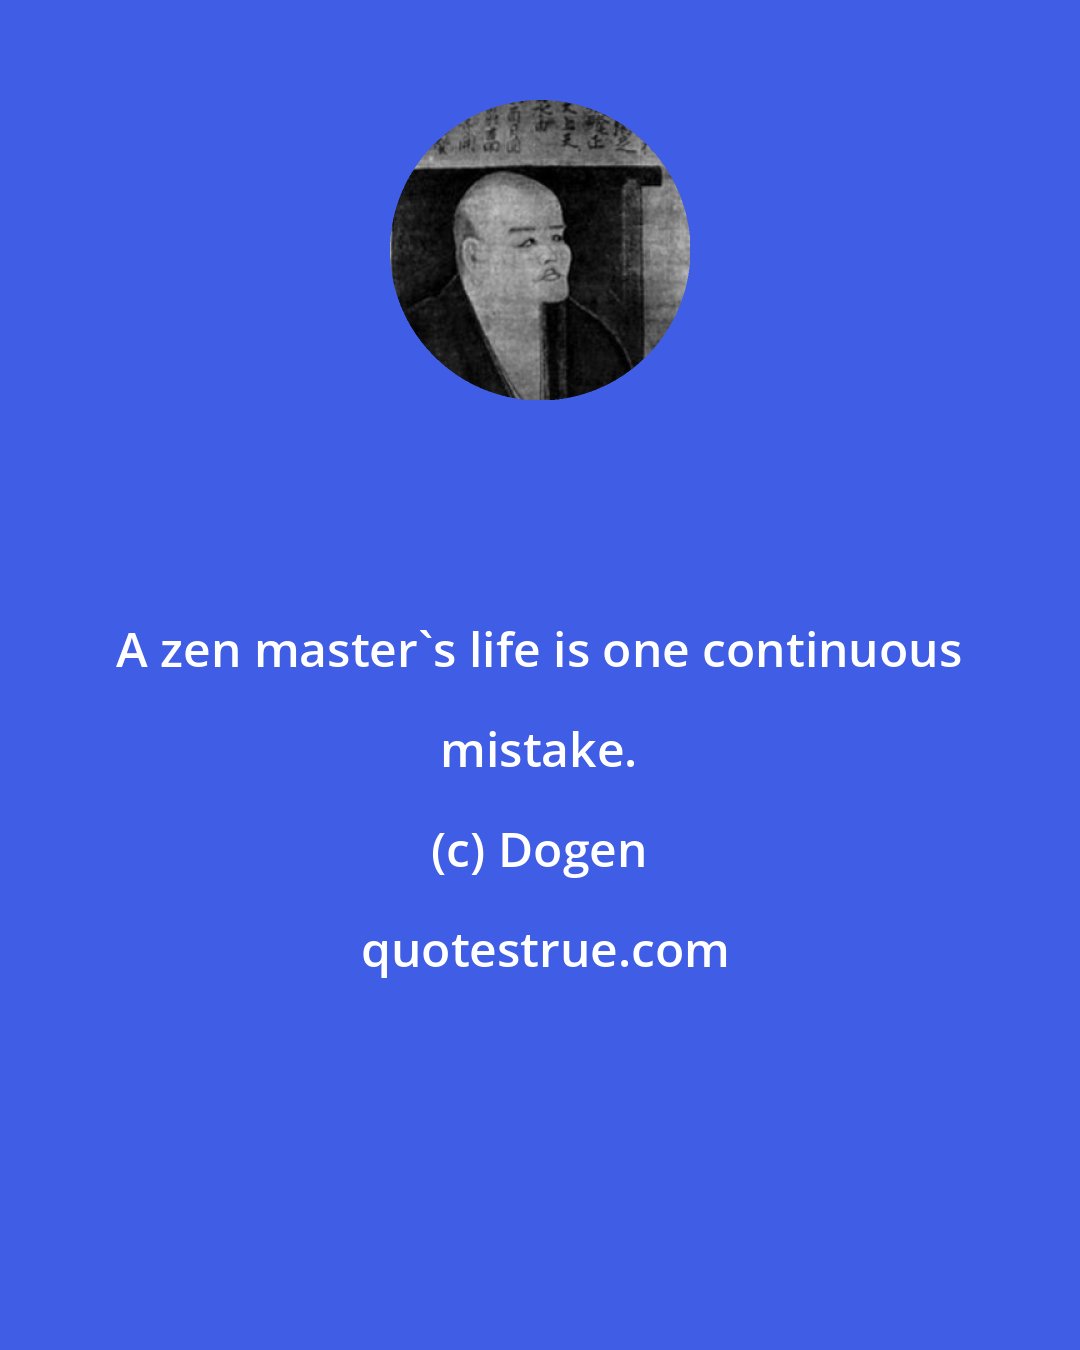 Dogen: A zen master's life is one continuous mistake.